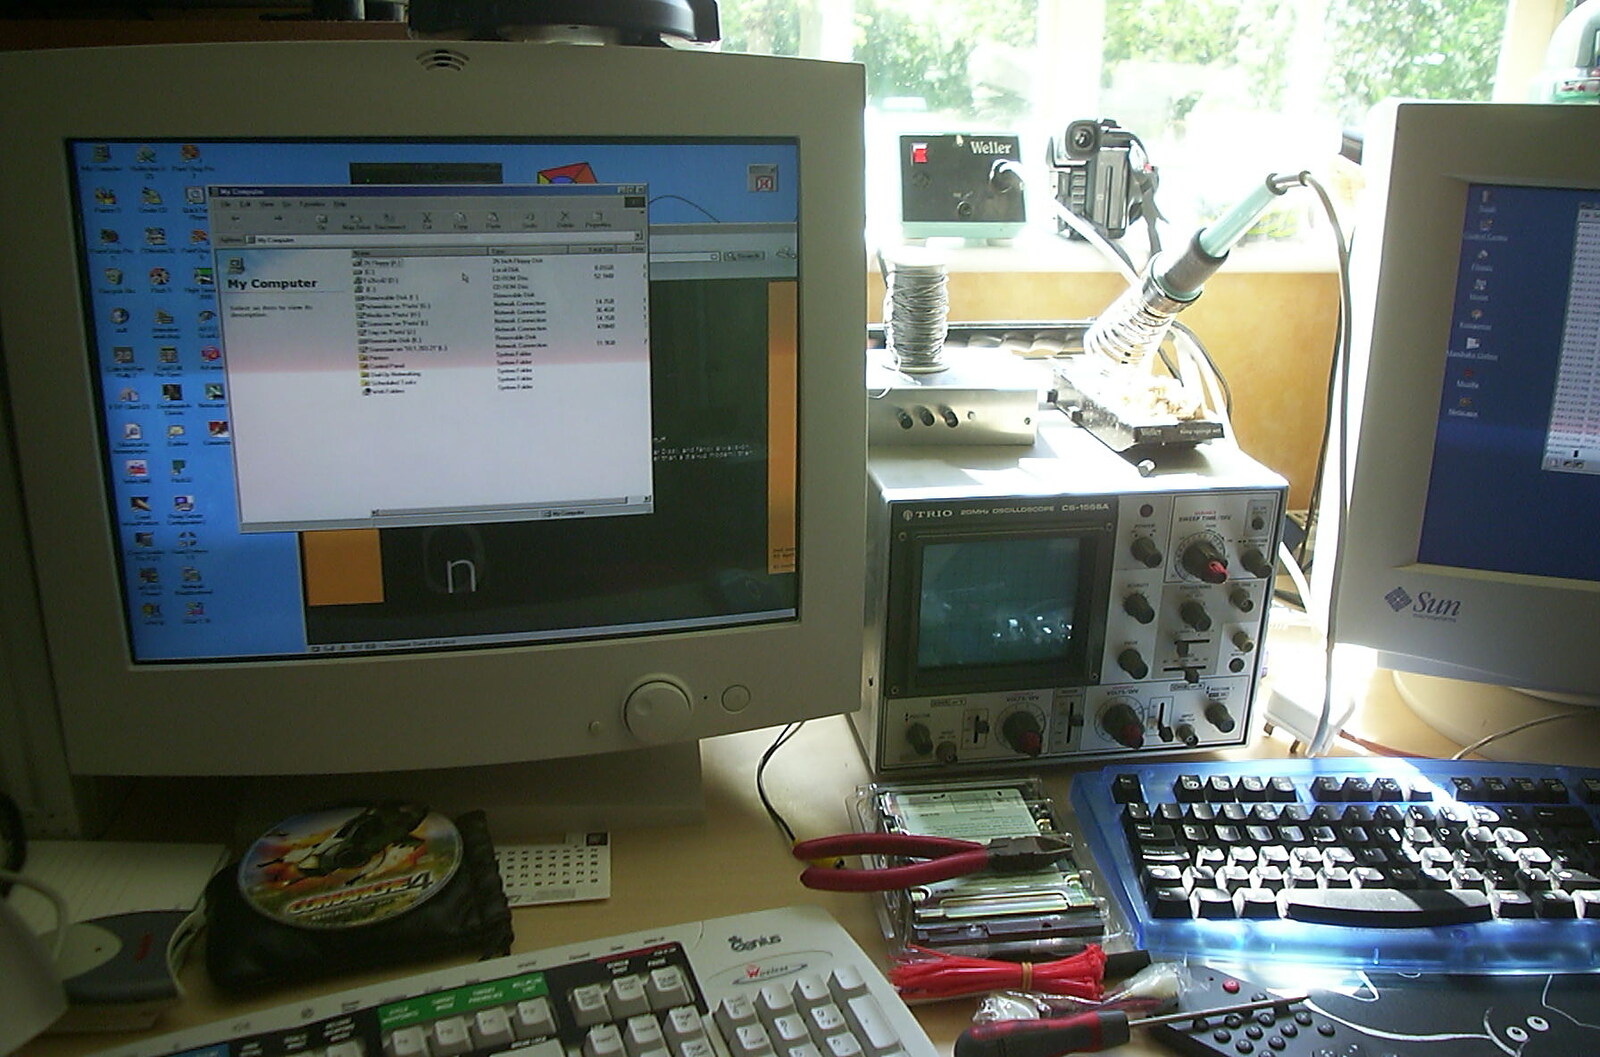 The desk in the office from A Hard-Drive Clock and Other Projects, Brome, Suffolk - 28th June 2002